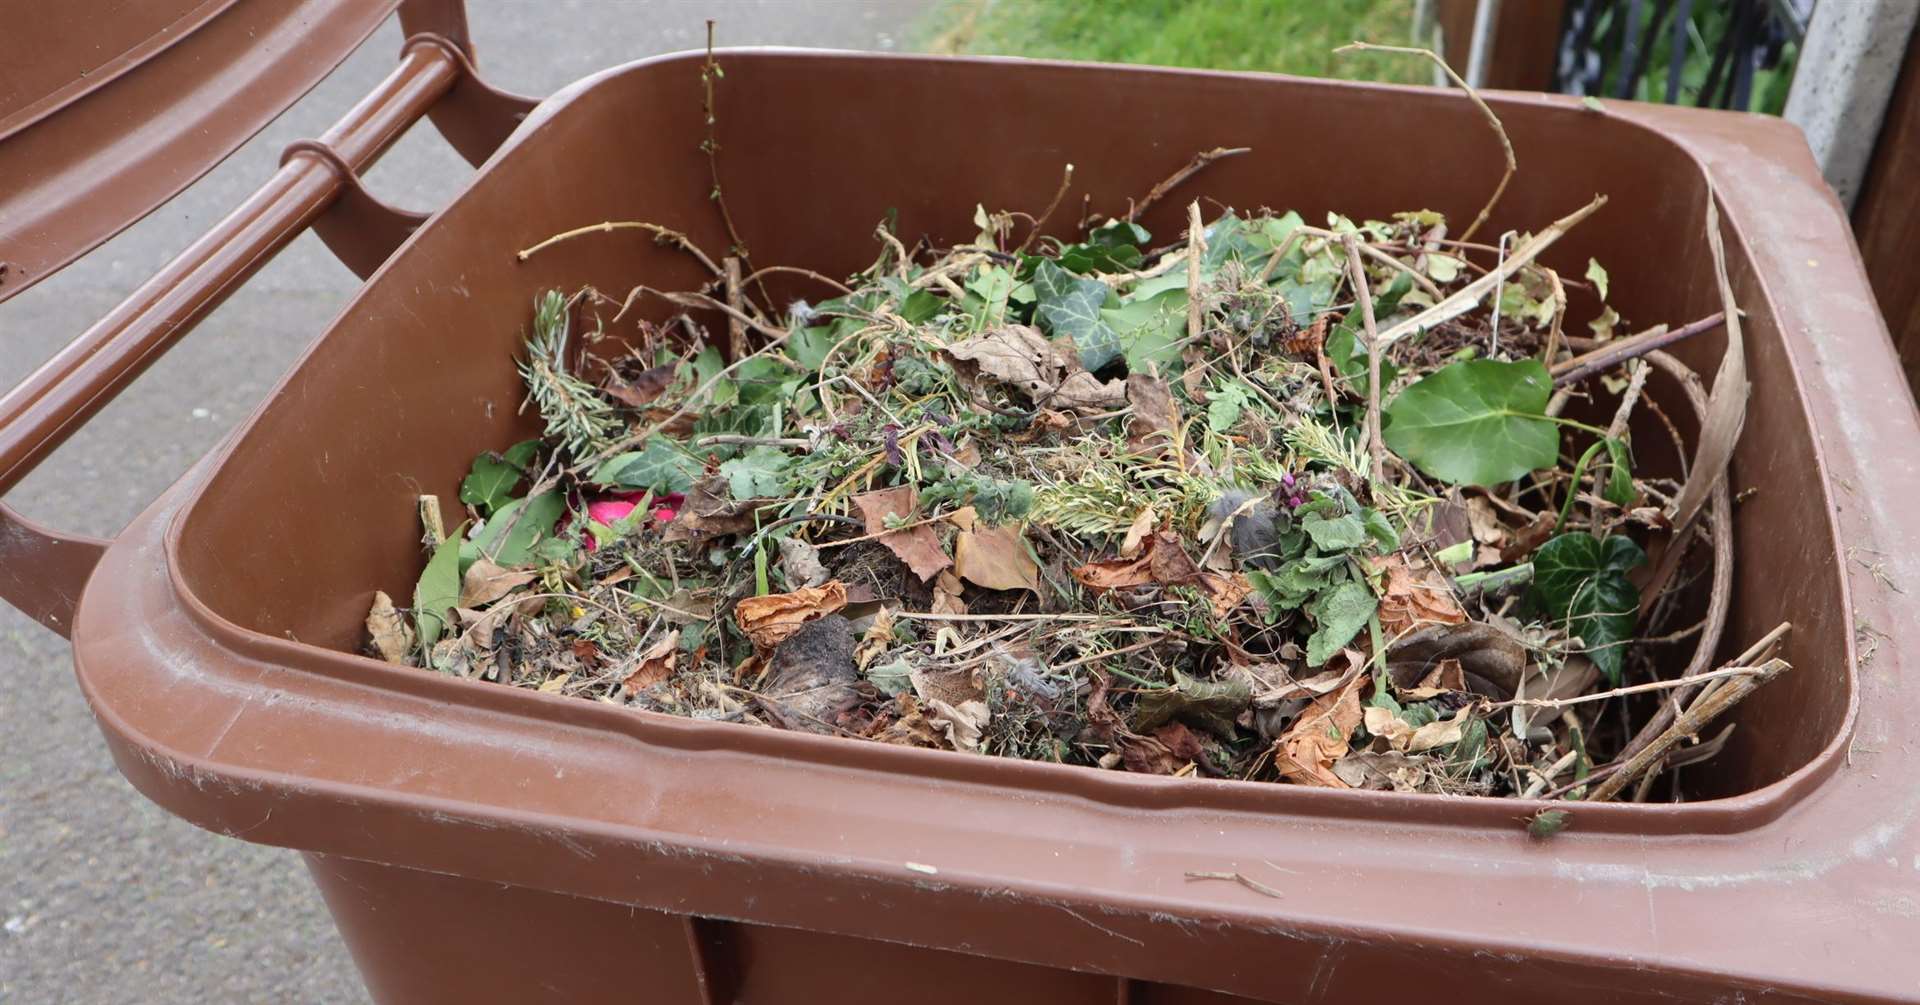 Brown bin collections for garden waste will resume